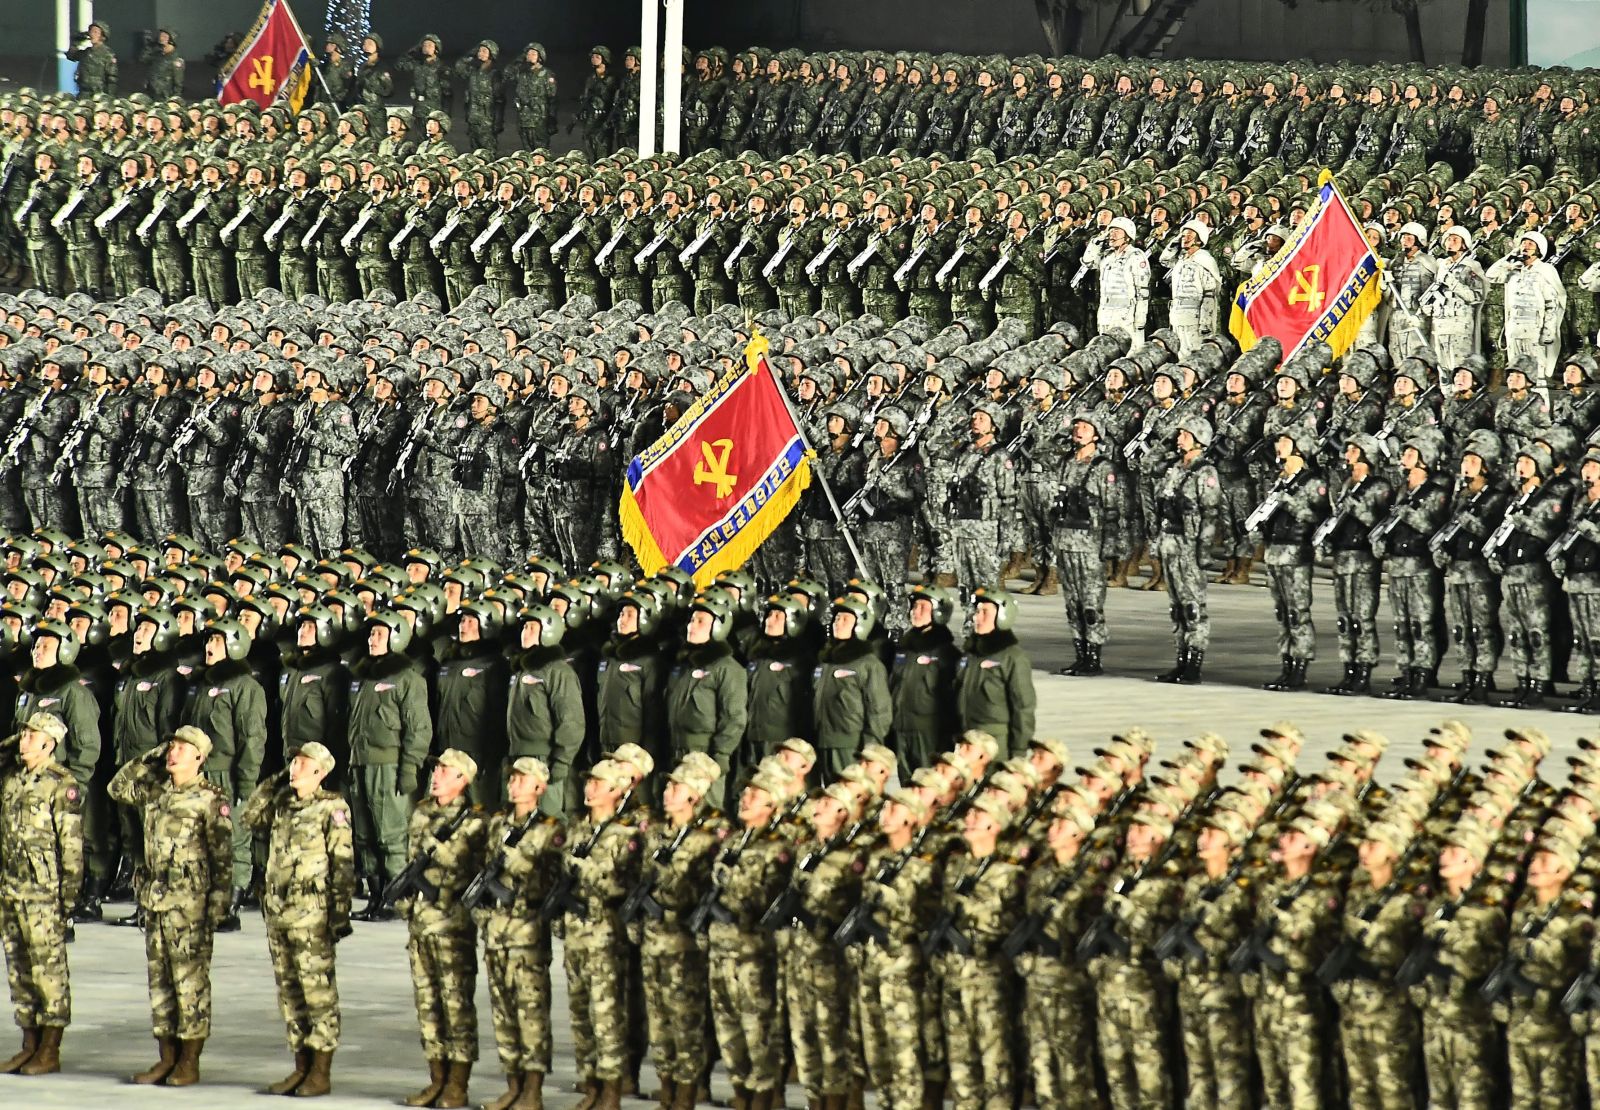 epa08938272 A photo released by the official North Korean Central News Agency (KCNA) shows a moment of the military parade held to mark the 8th Congress of the Workers' Party of Korea (WPK) in Pyongyang, North Korea, 14 January 2021 (issued 15 January 2021).  EPA/KCNA   EDITORIAL USE ONLY